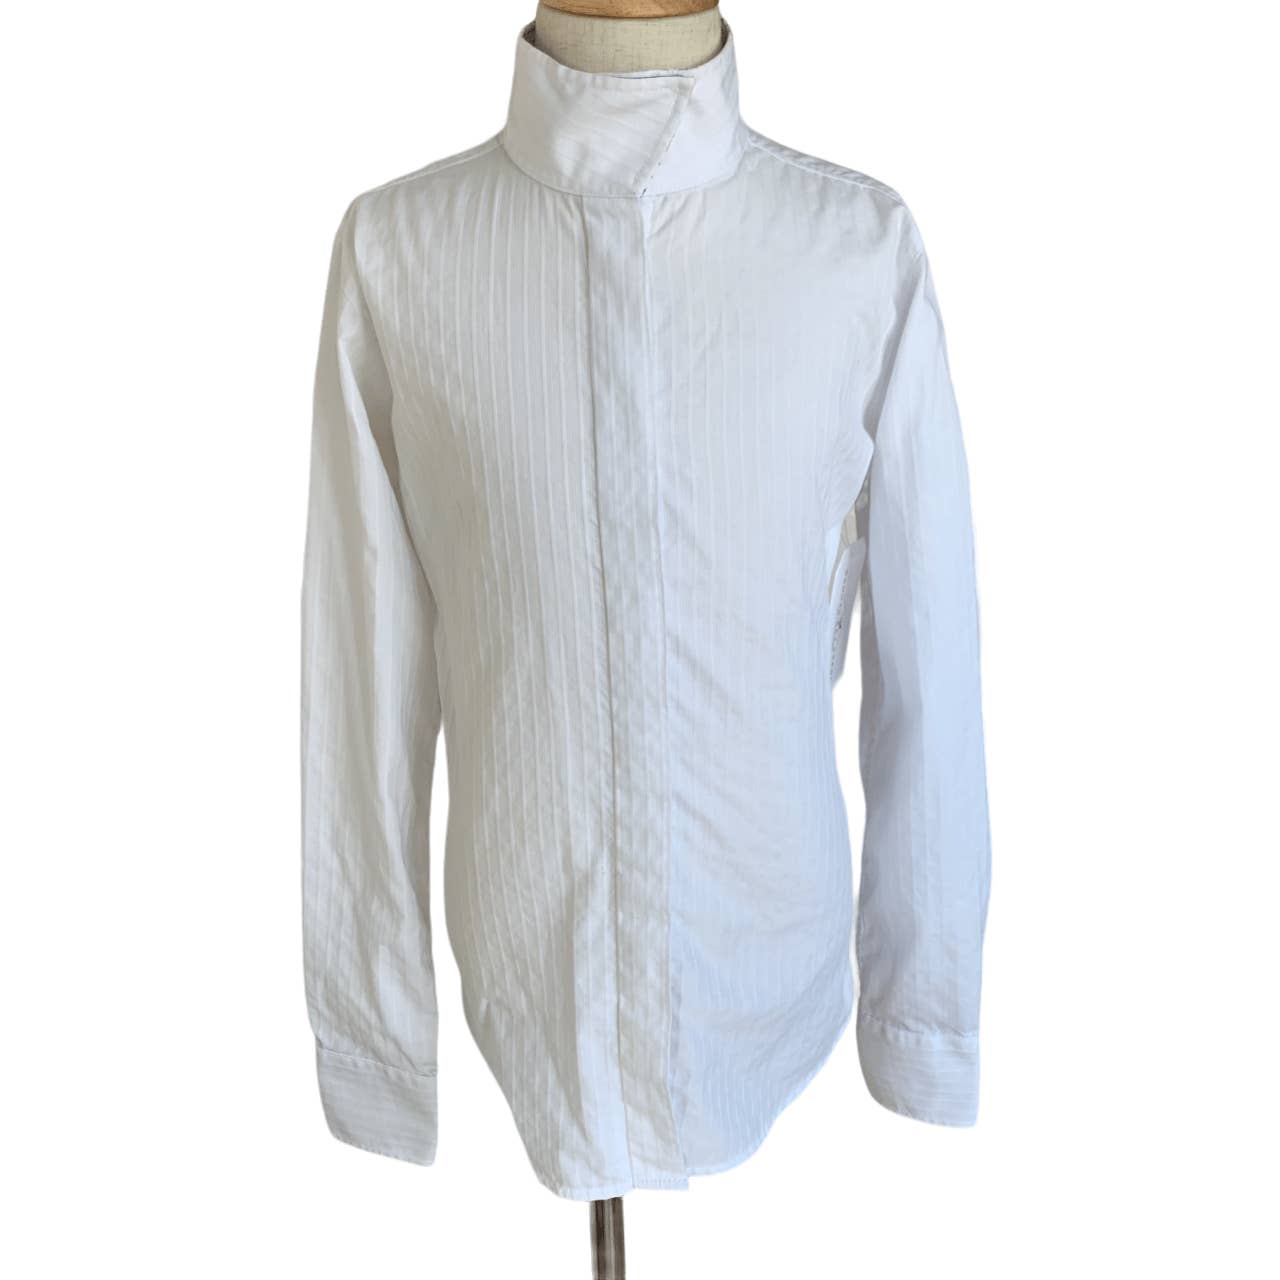 R.J. Classics 'Essential Collection' Show Shirt in White - Youth 12